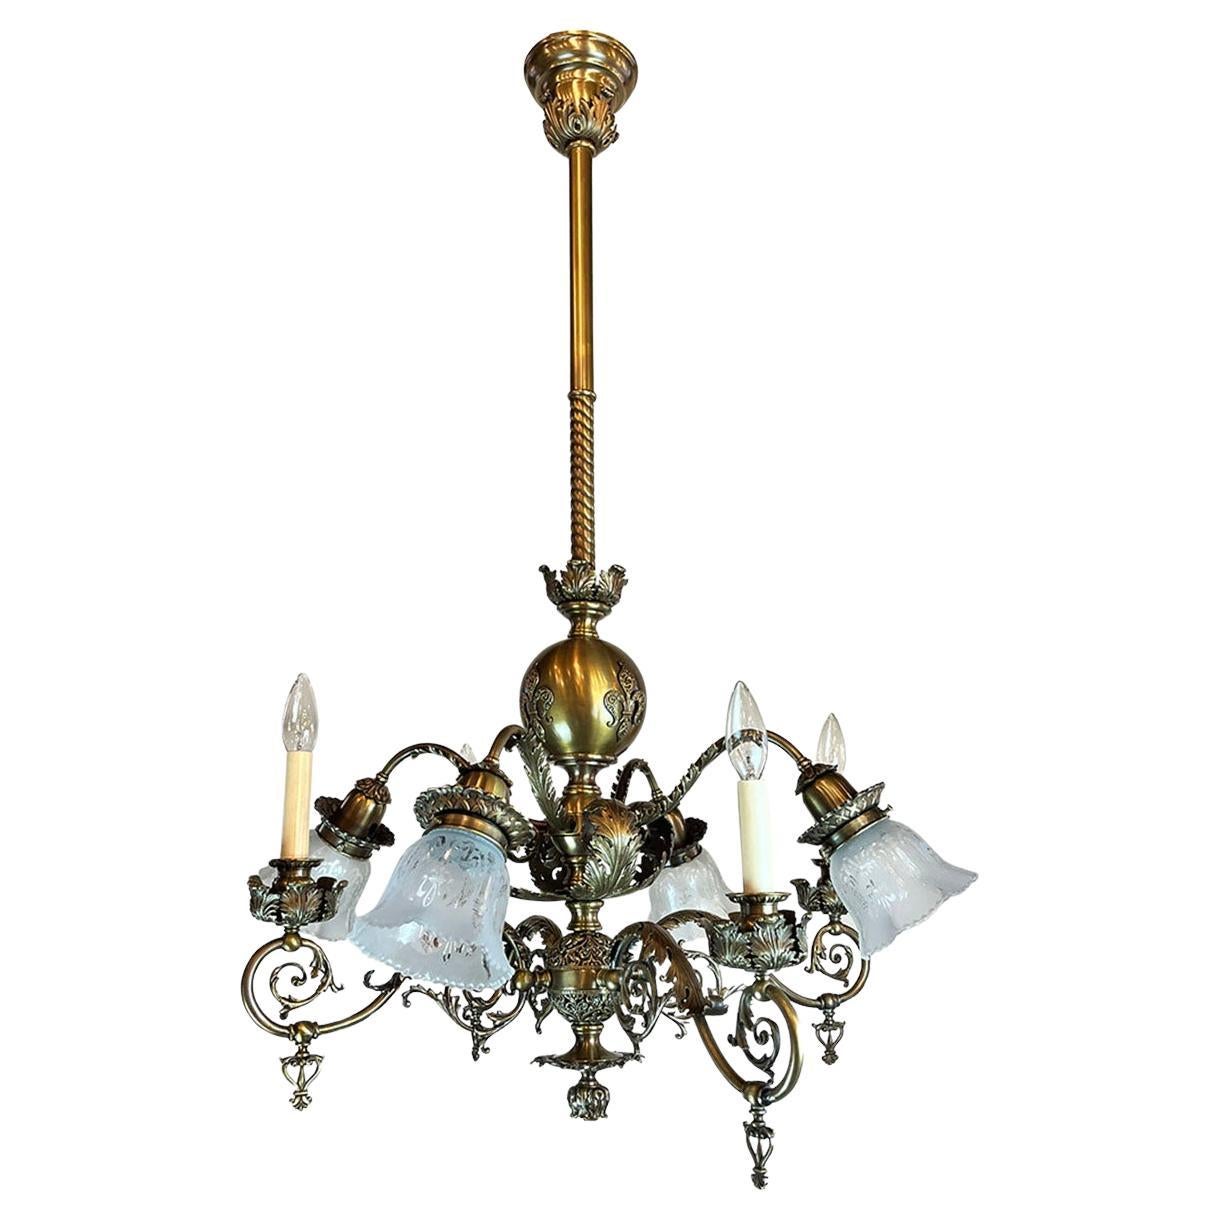 Rare Late Victorian 1890s Combination Gas Electric Chandelier For Sale